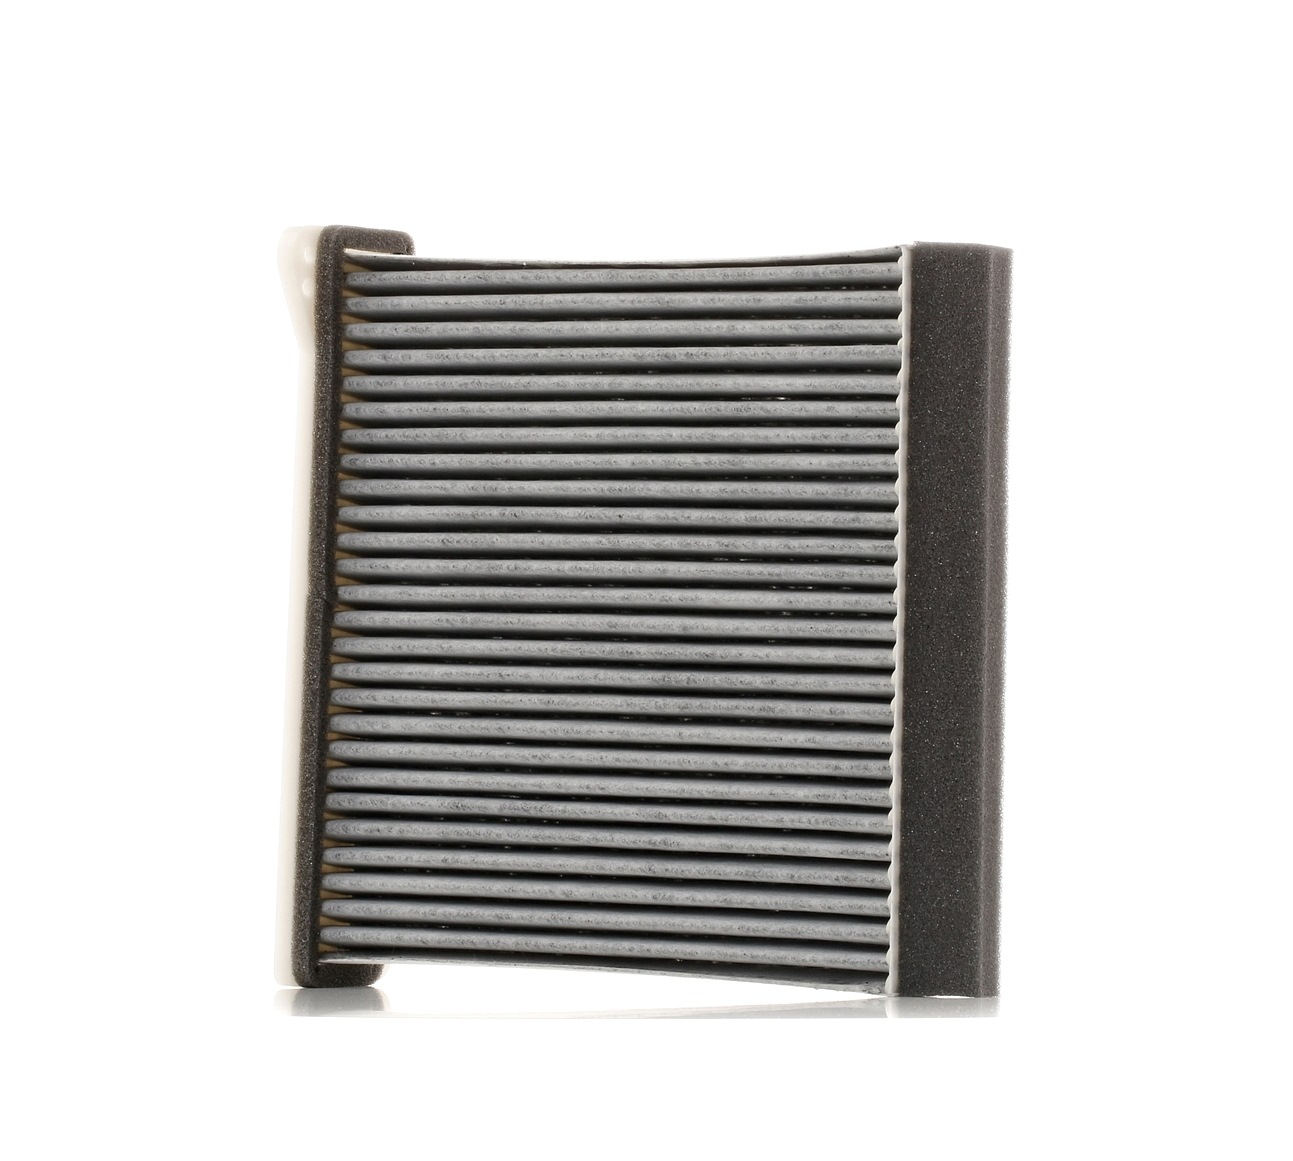 MANN-FILTER Activated Carbon Filter, 233 mm x 231 mm x 74 mm Width: 231mm, Height: 74mm, Length: 233mm Cabin filter CUK 2231 buy